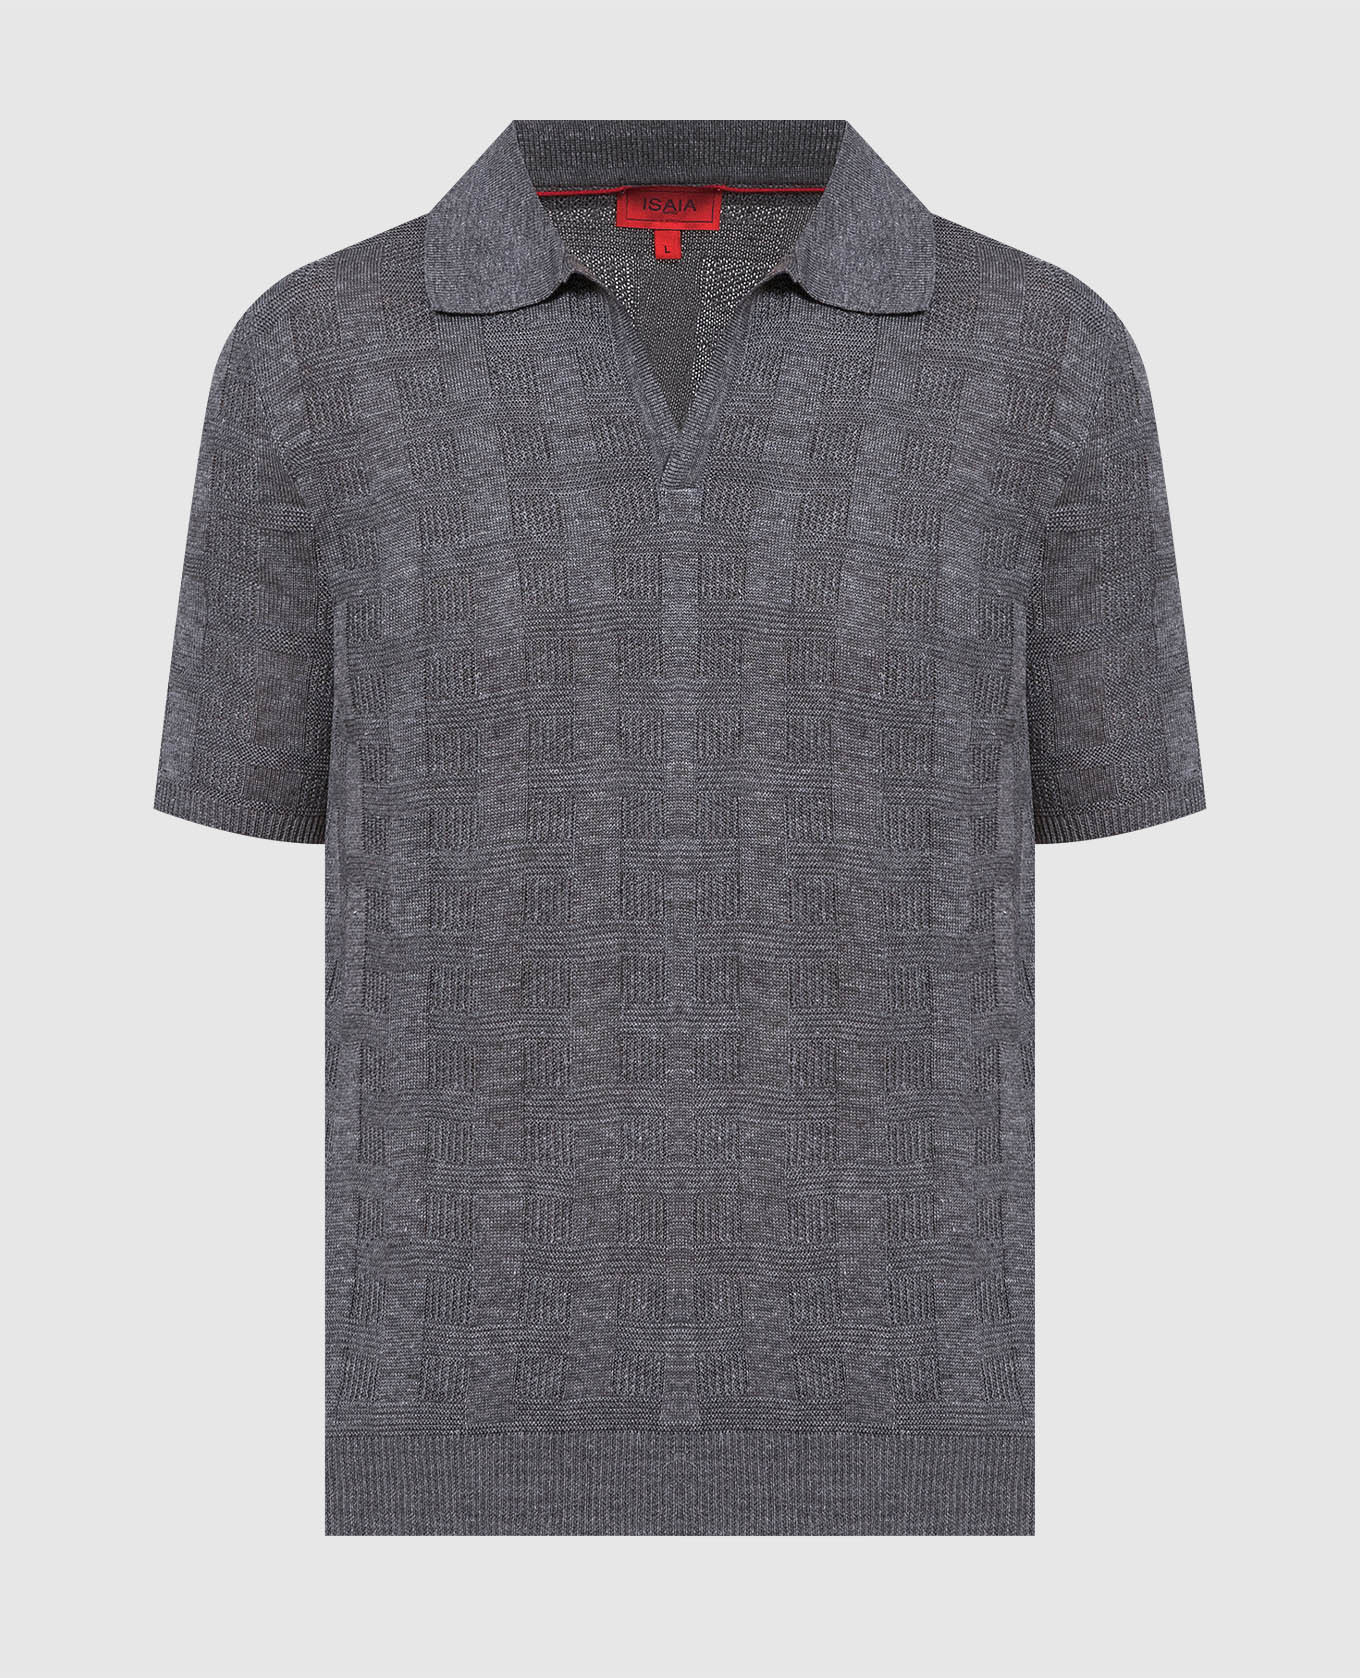 Gray polo shirt made of linen and silk in a woven pattern